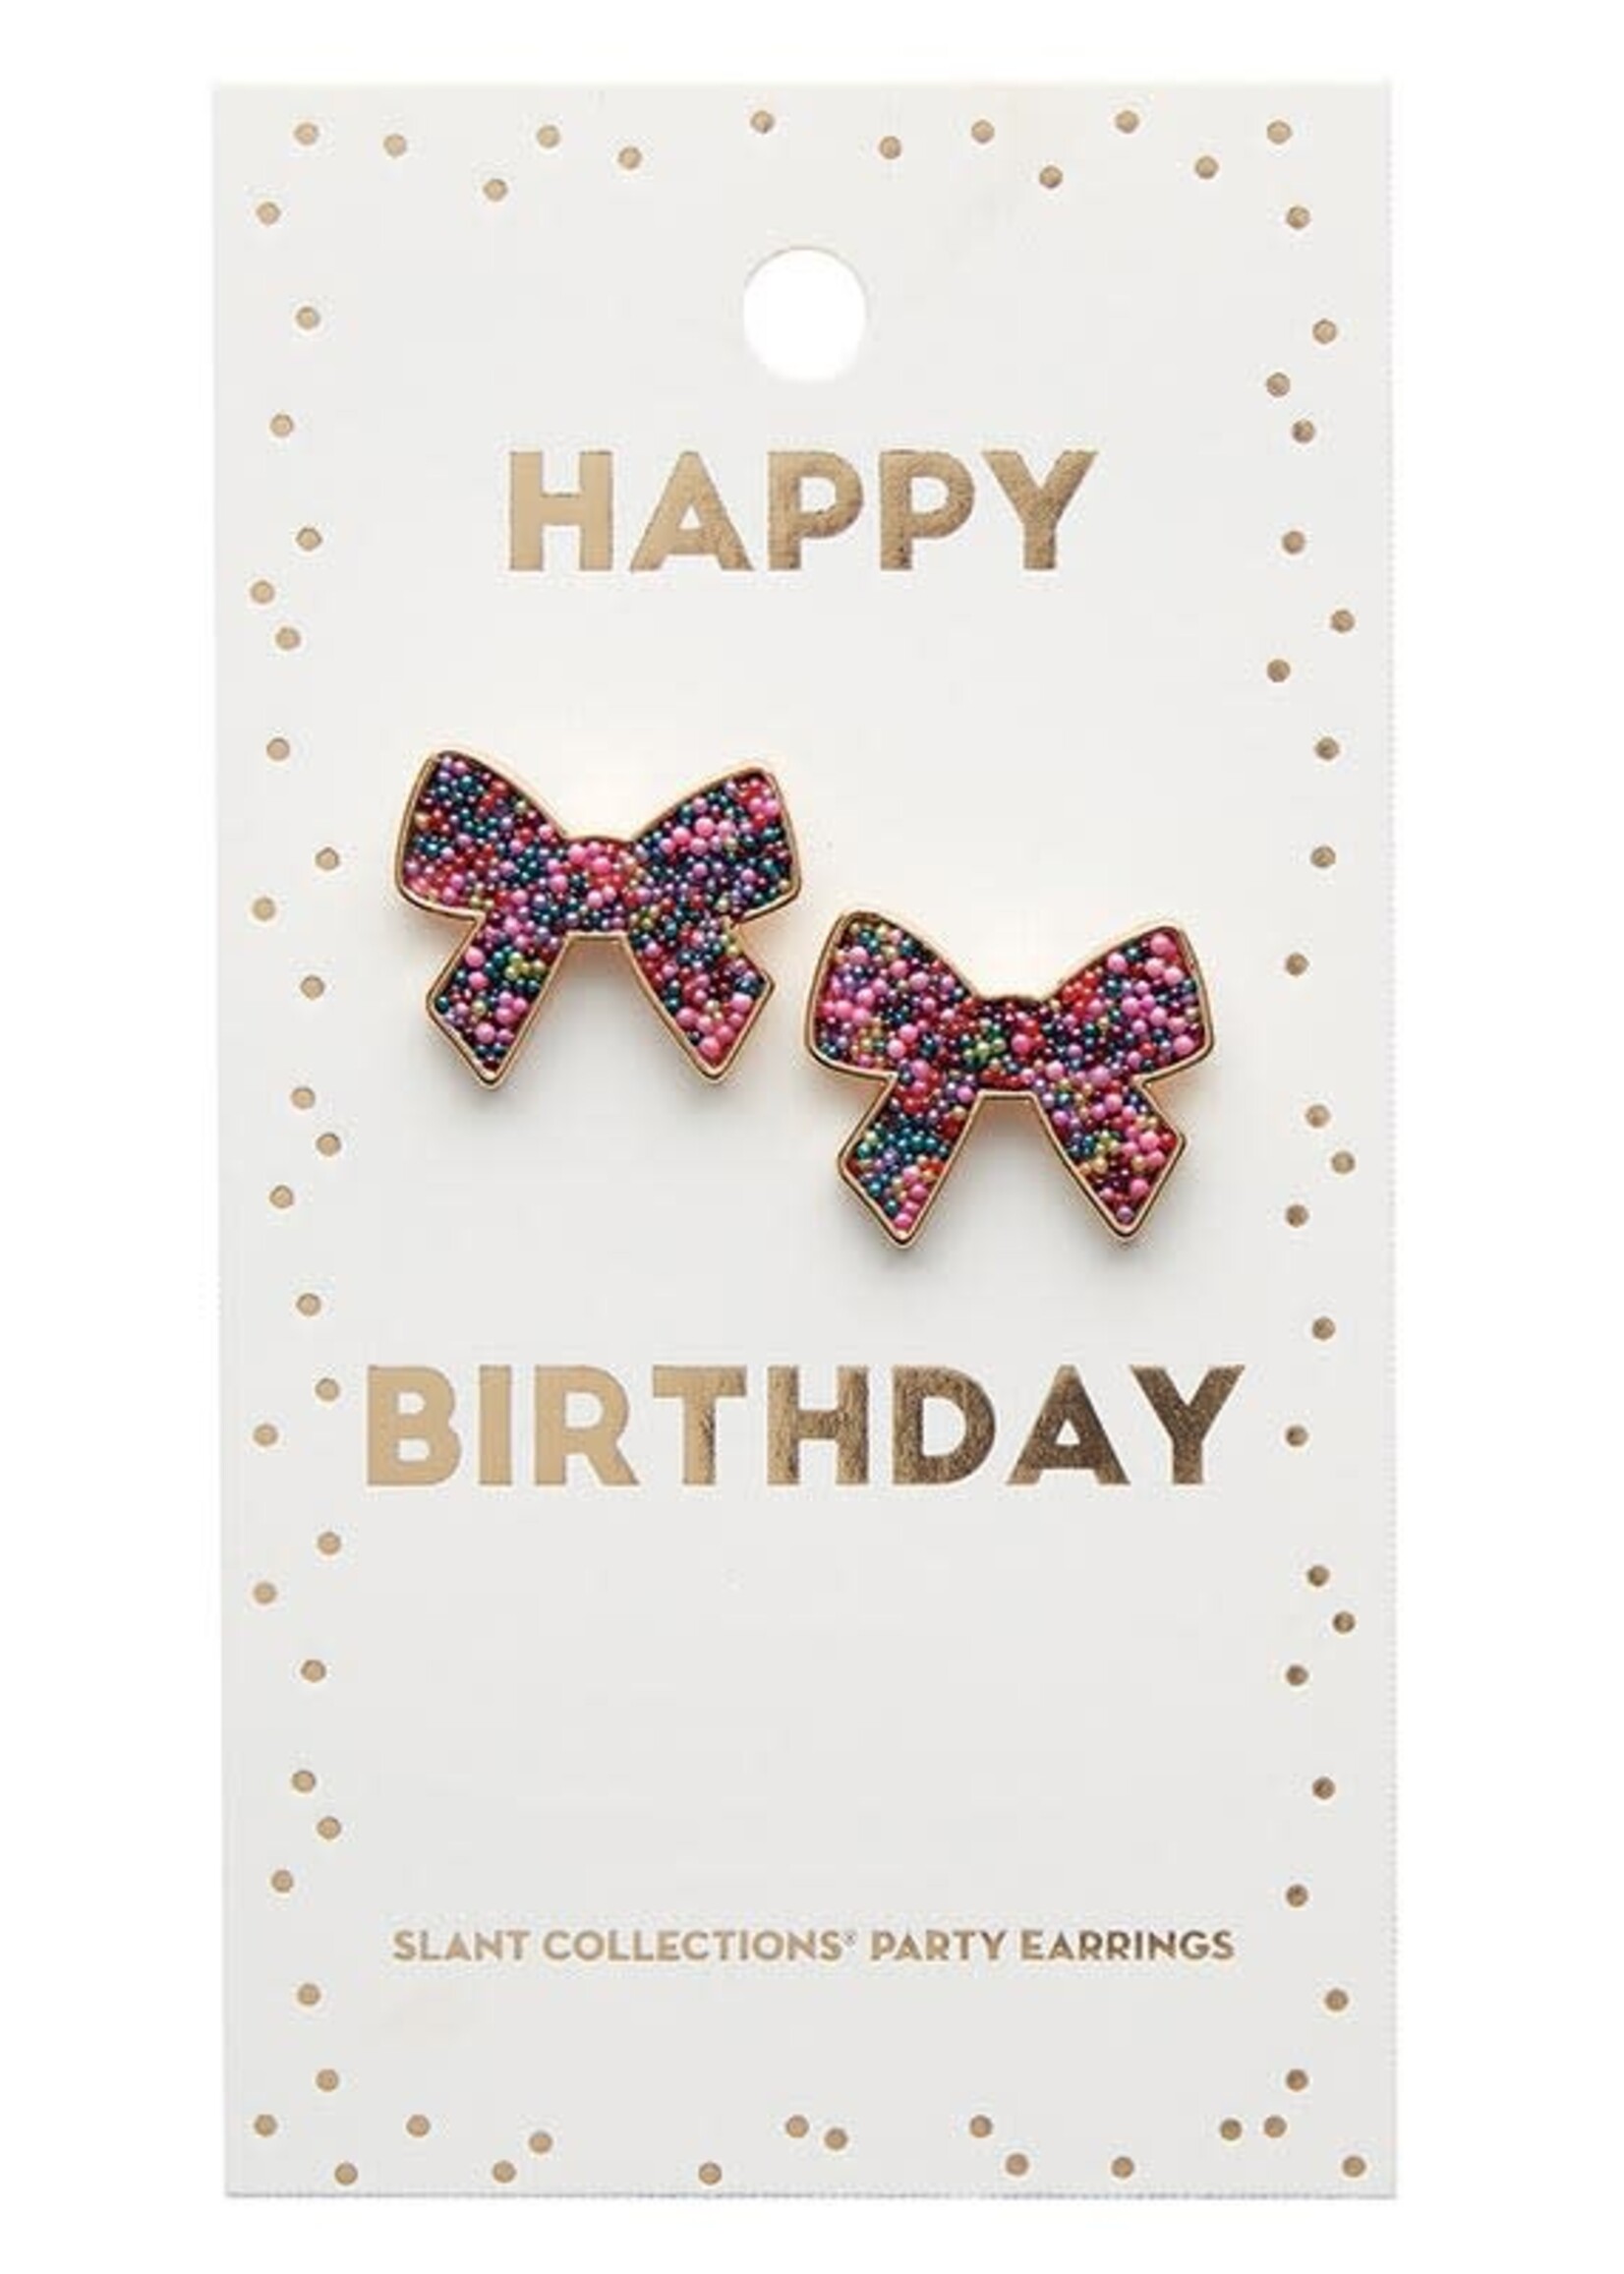 Creative Twist Events Party Earrings - HBD